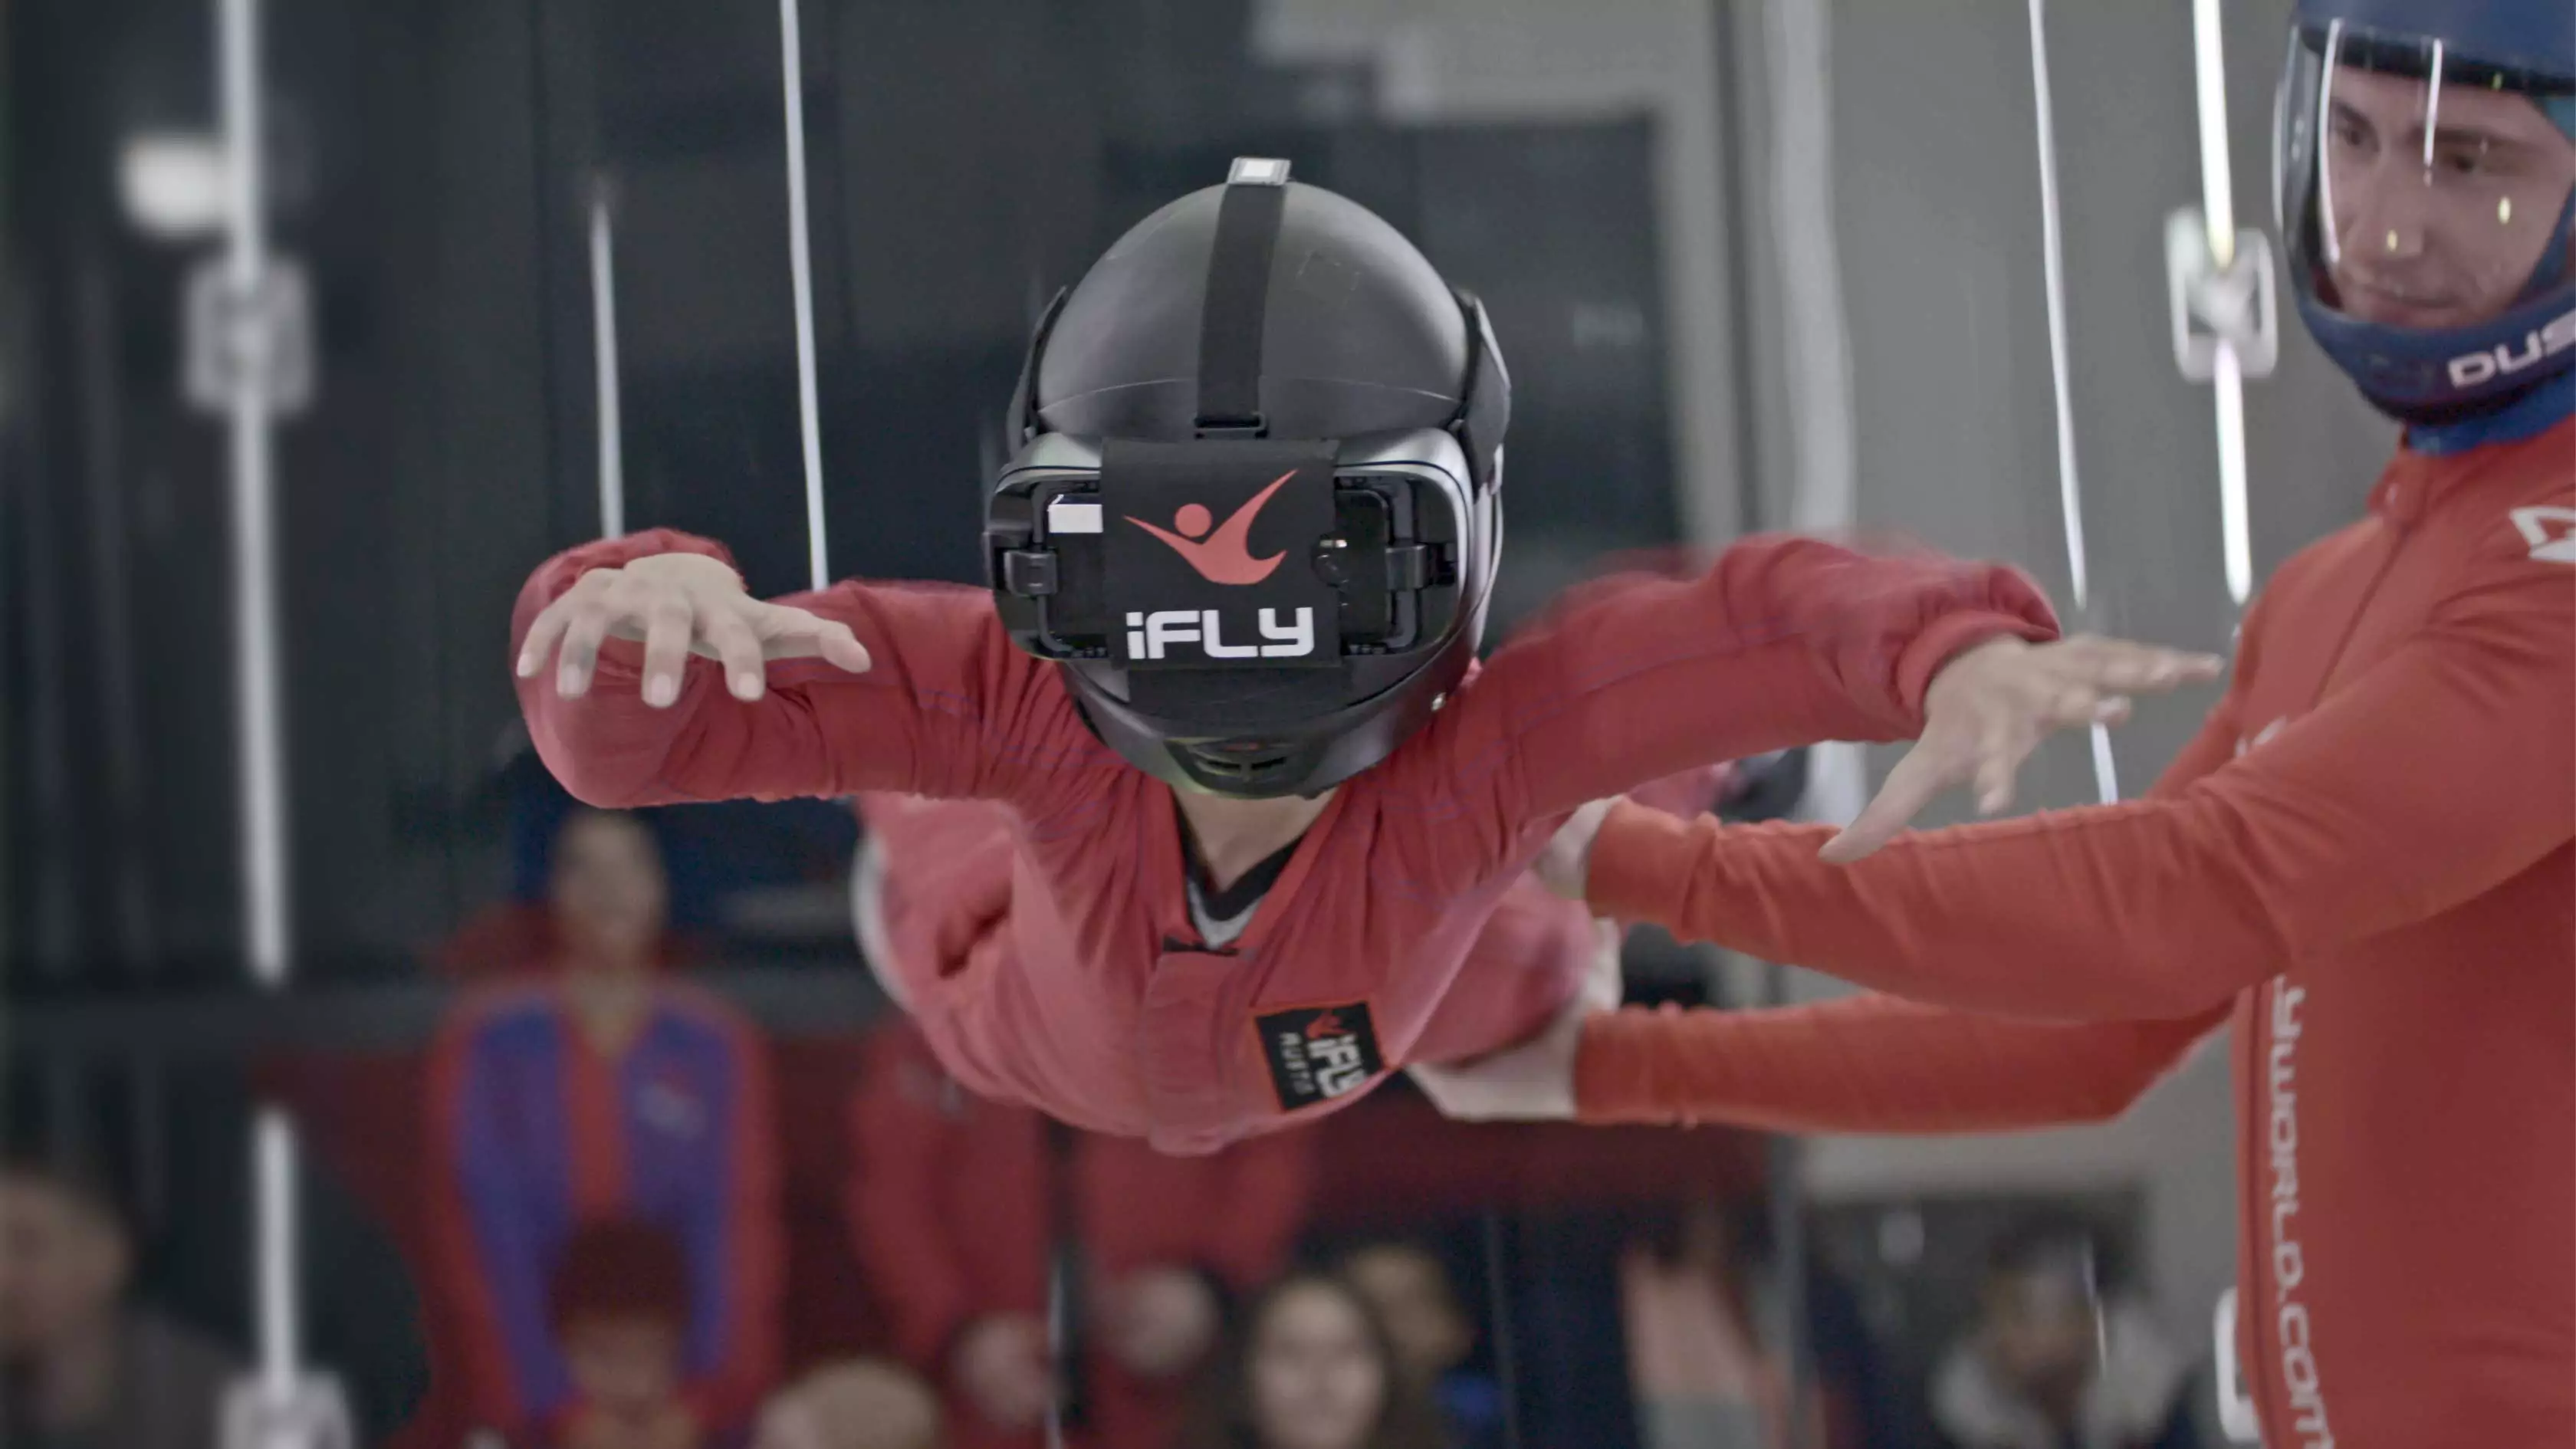 Young child flying in an iFLY tunnel with VR goggles on